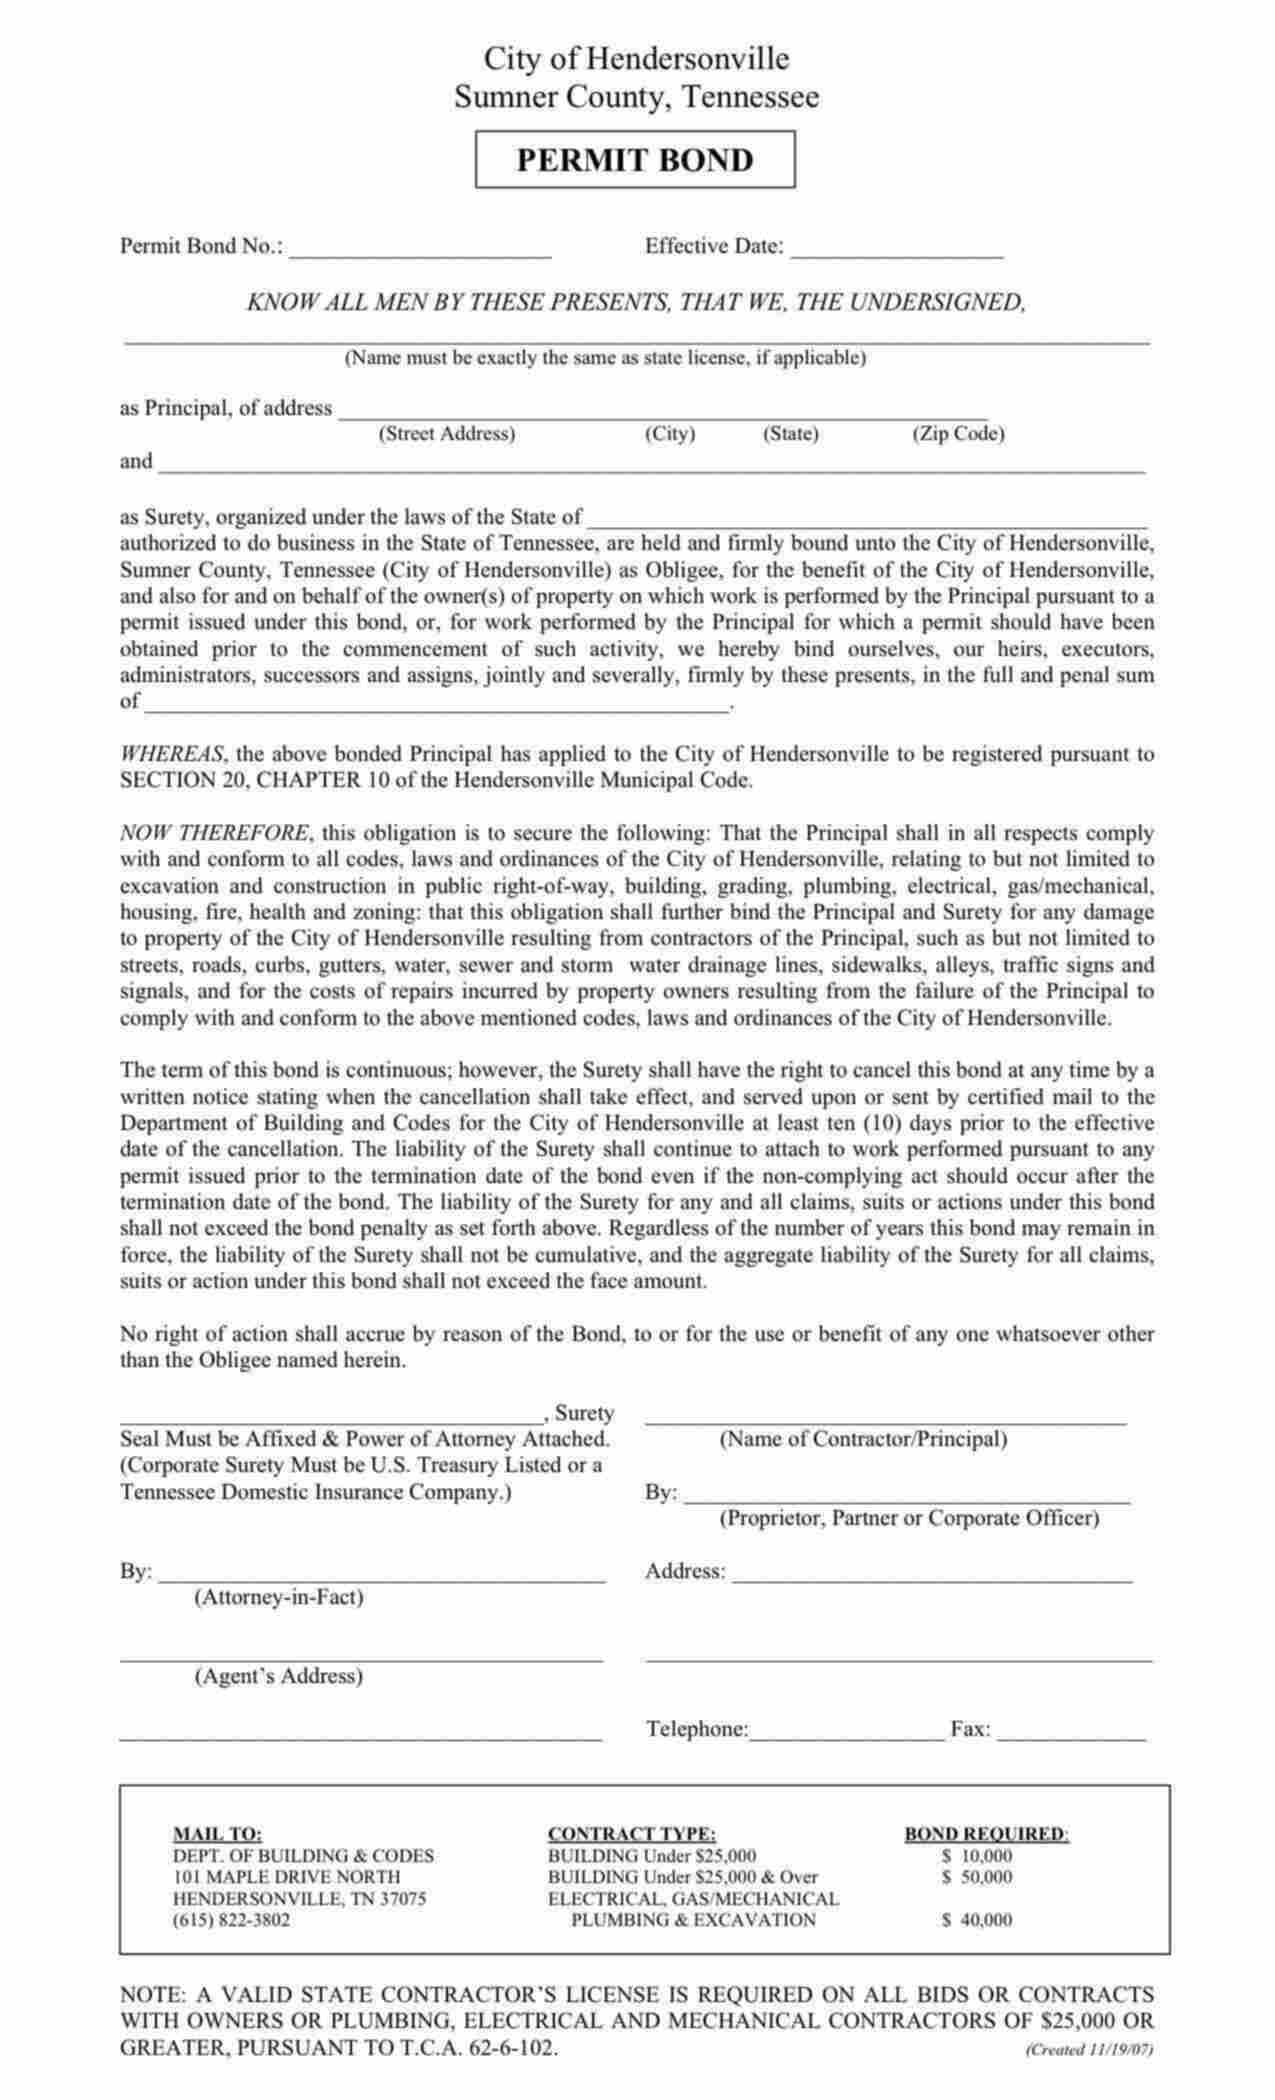 Tennessee Contractor Registration Permit Bond Form